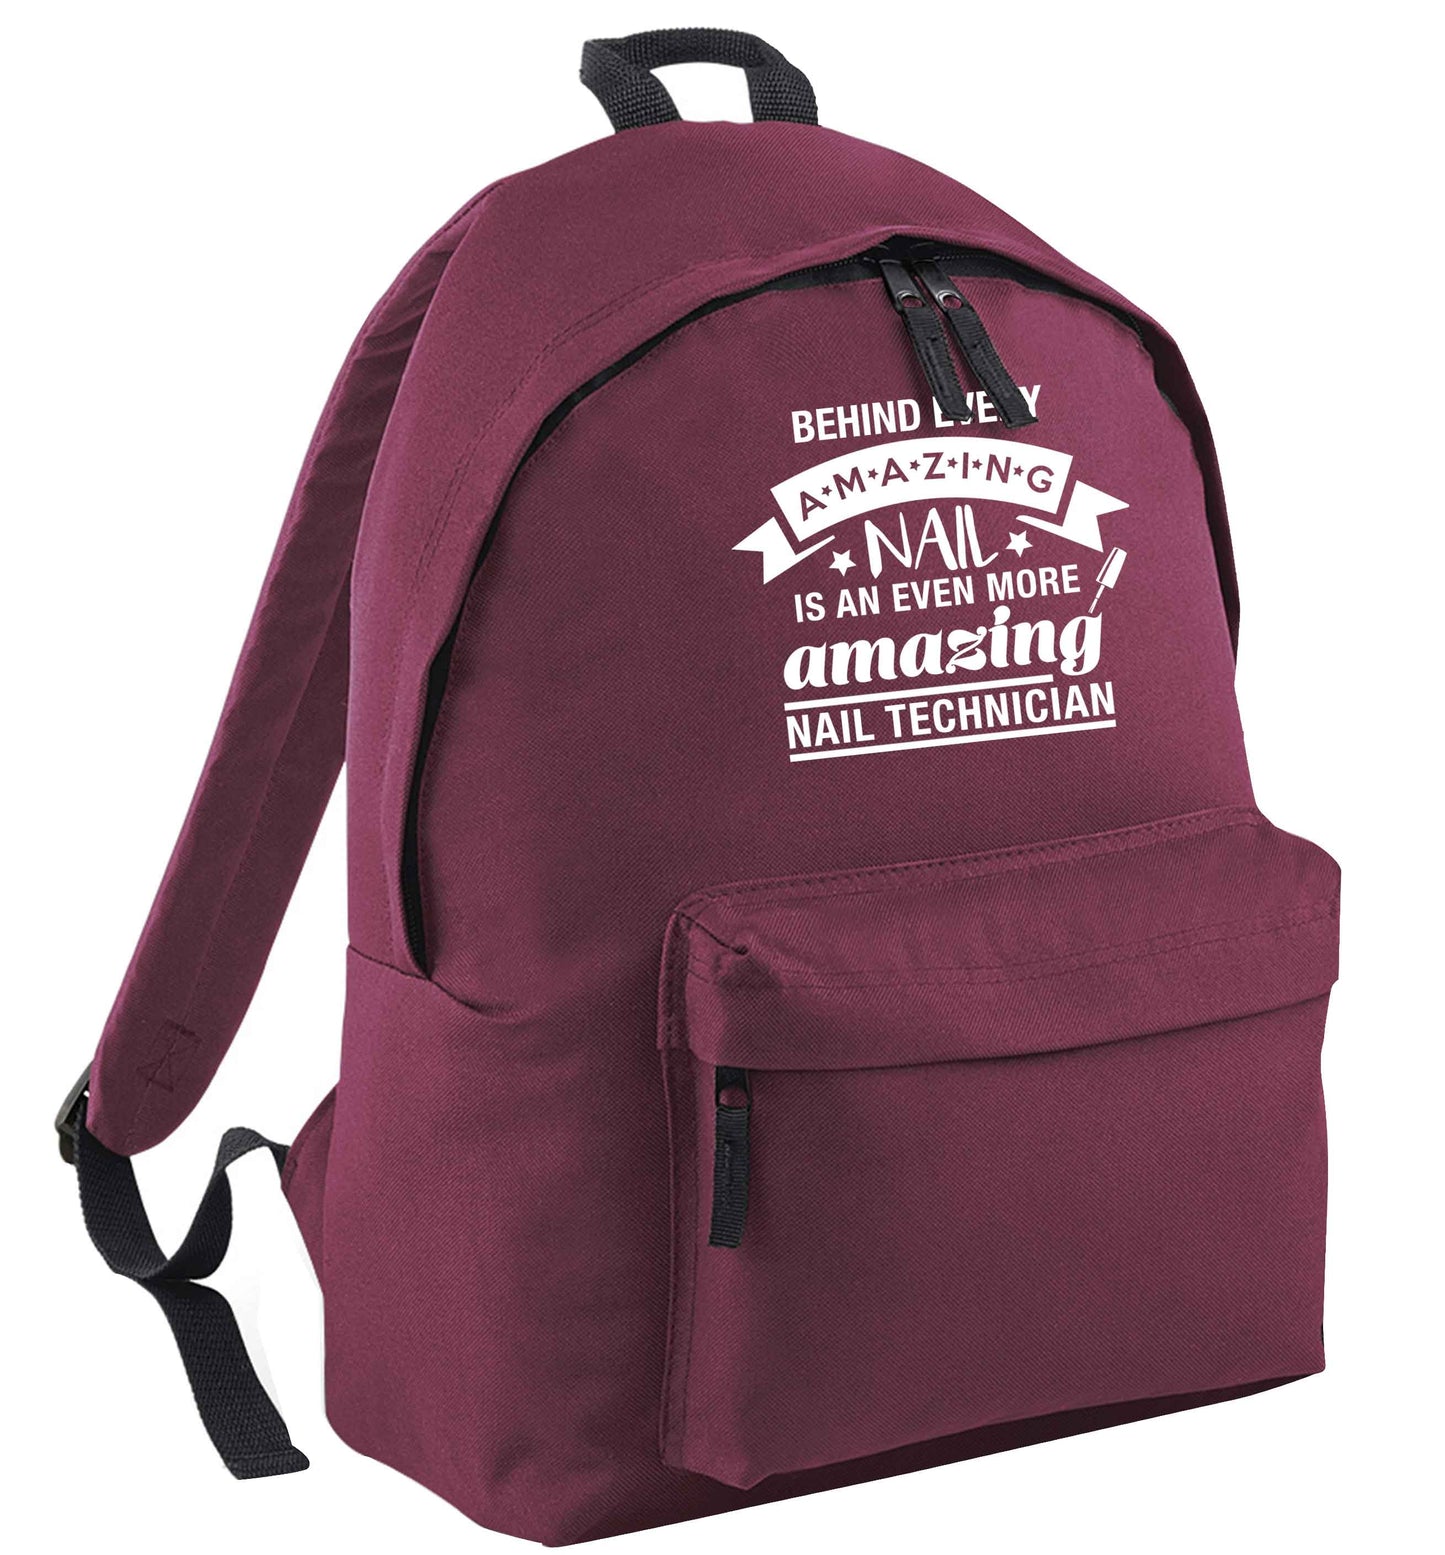 Behind every amazing nail is an even more amazing nail technician maroon adults backpack